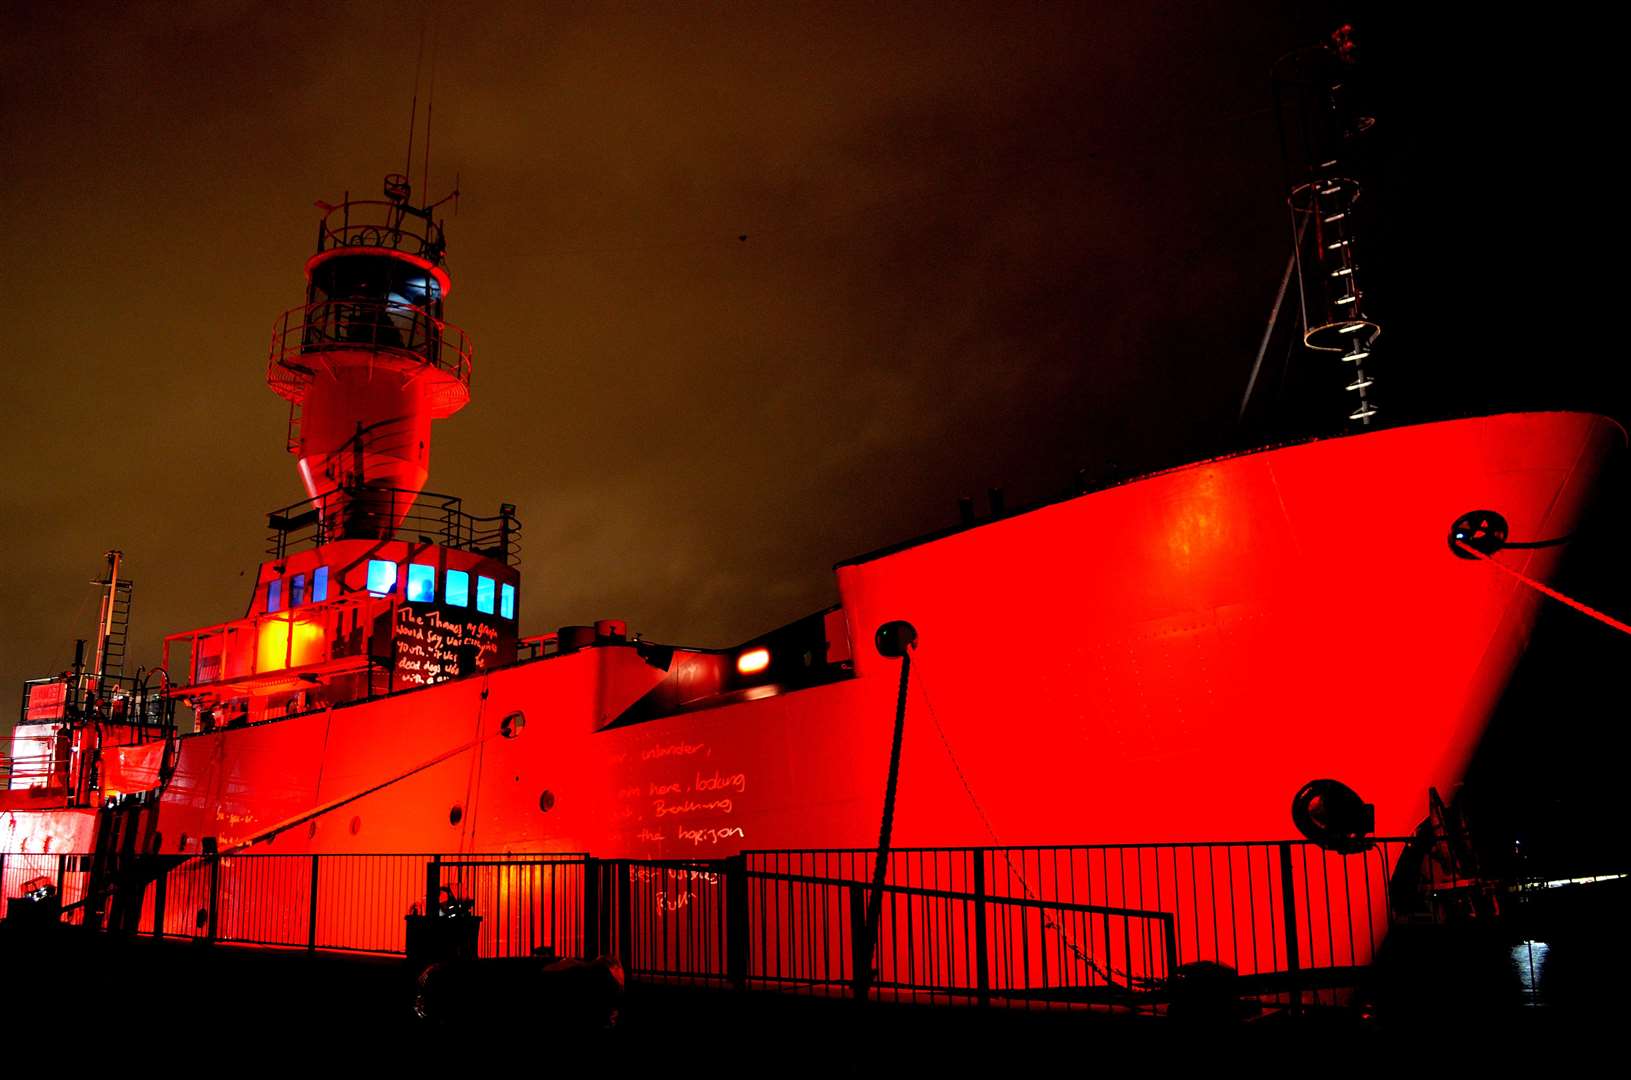 The historic LV21 lightship is lit up this weekend as part of a reflect arts and minds project. Photo: Jason Arthur (19167905)